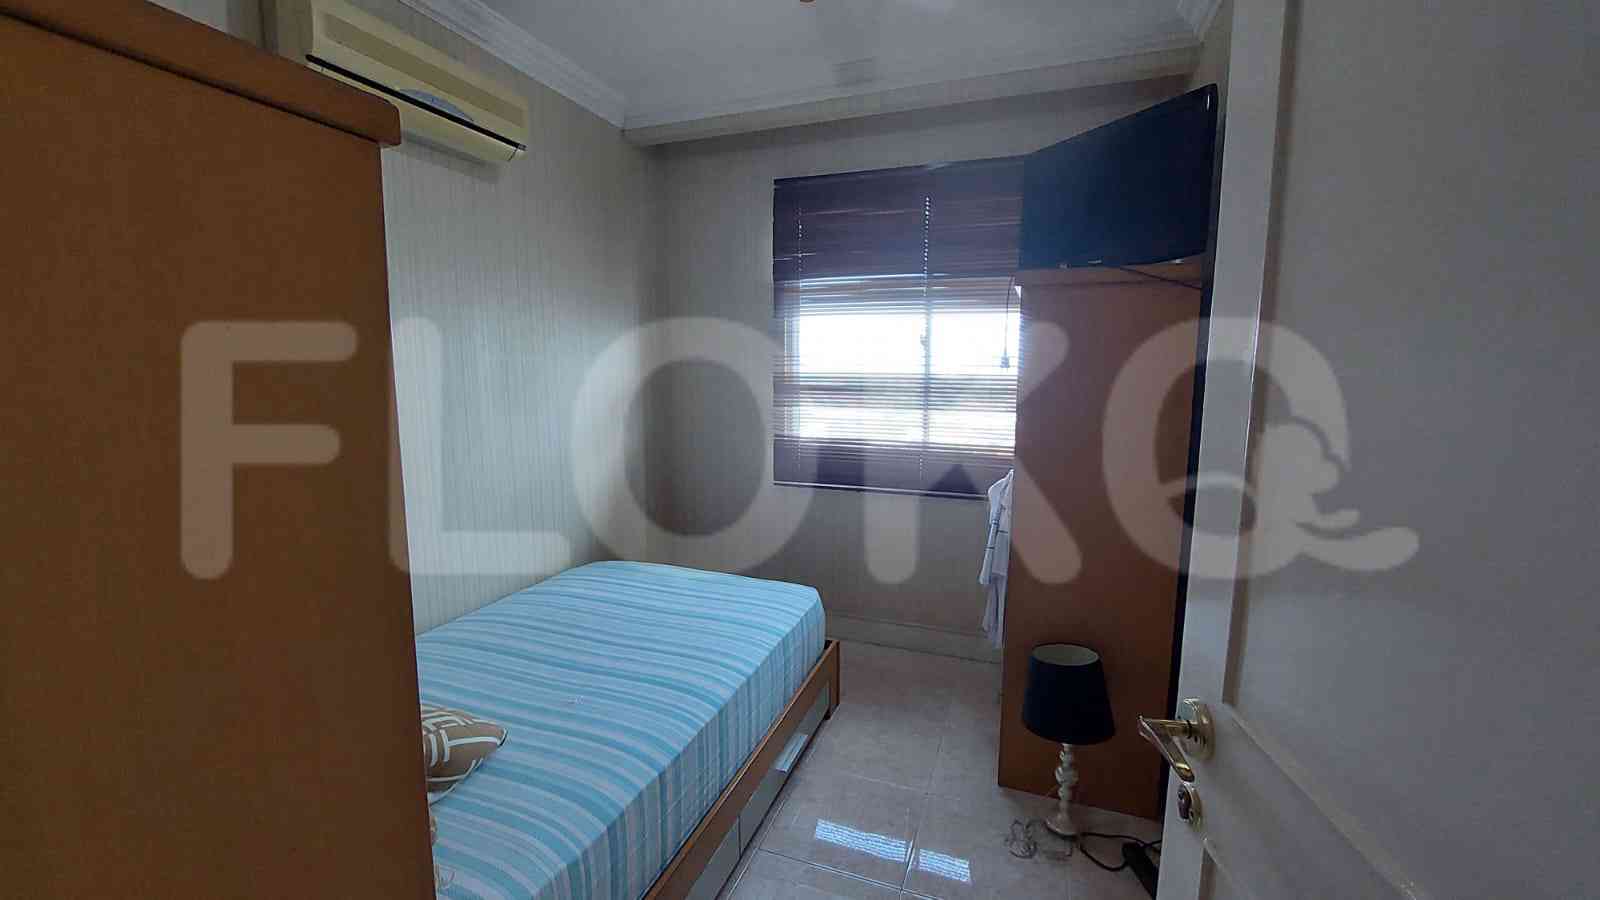 4 Bedroom on 15th Floor for Rent in Grand ITC Permata Hijau - fpec7a 5